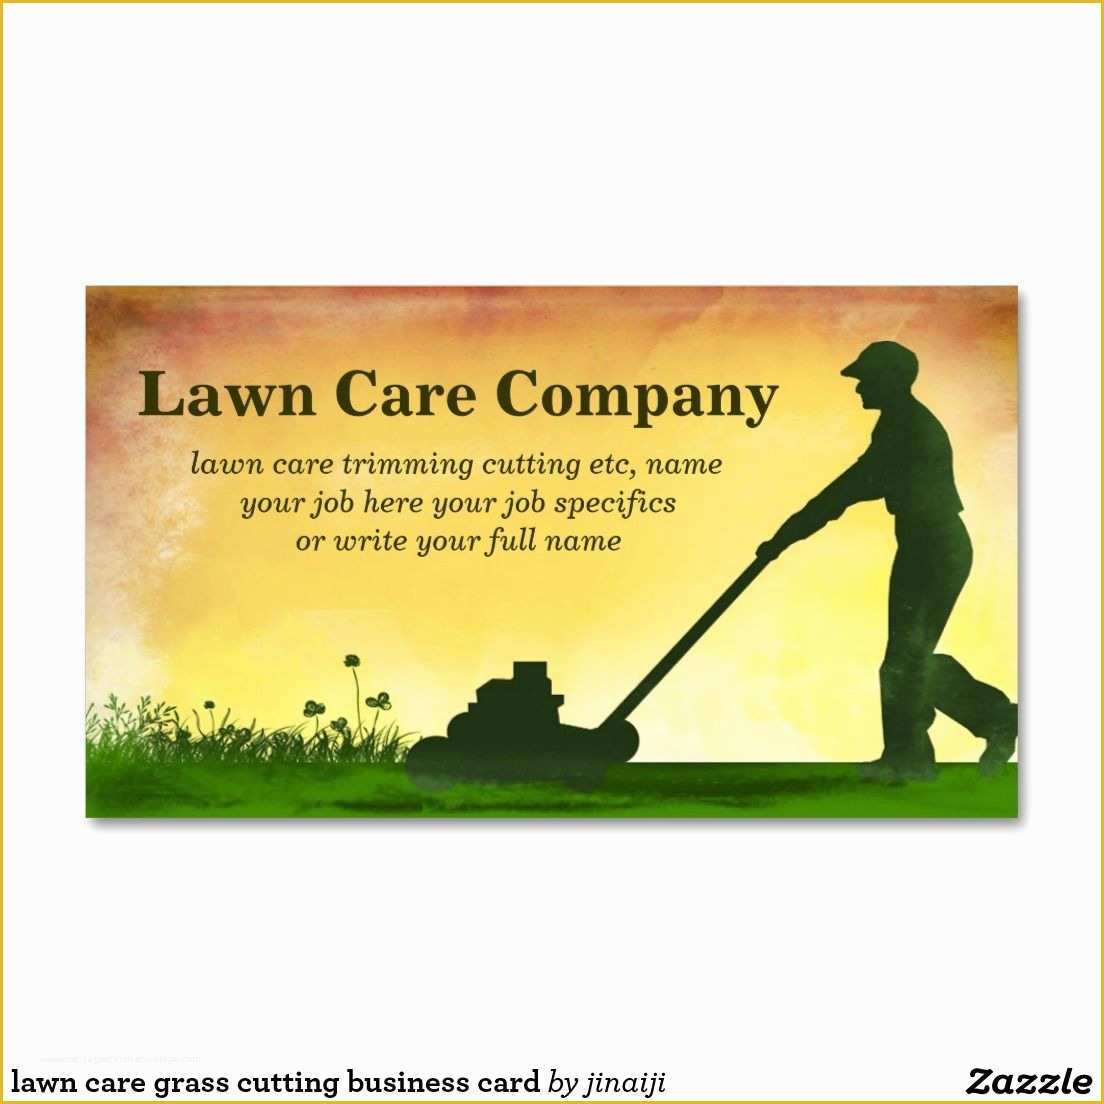 Lawn Care Business Card Templates Free Downloads Of Lawn Care Business Card Templates Business Card Design